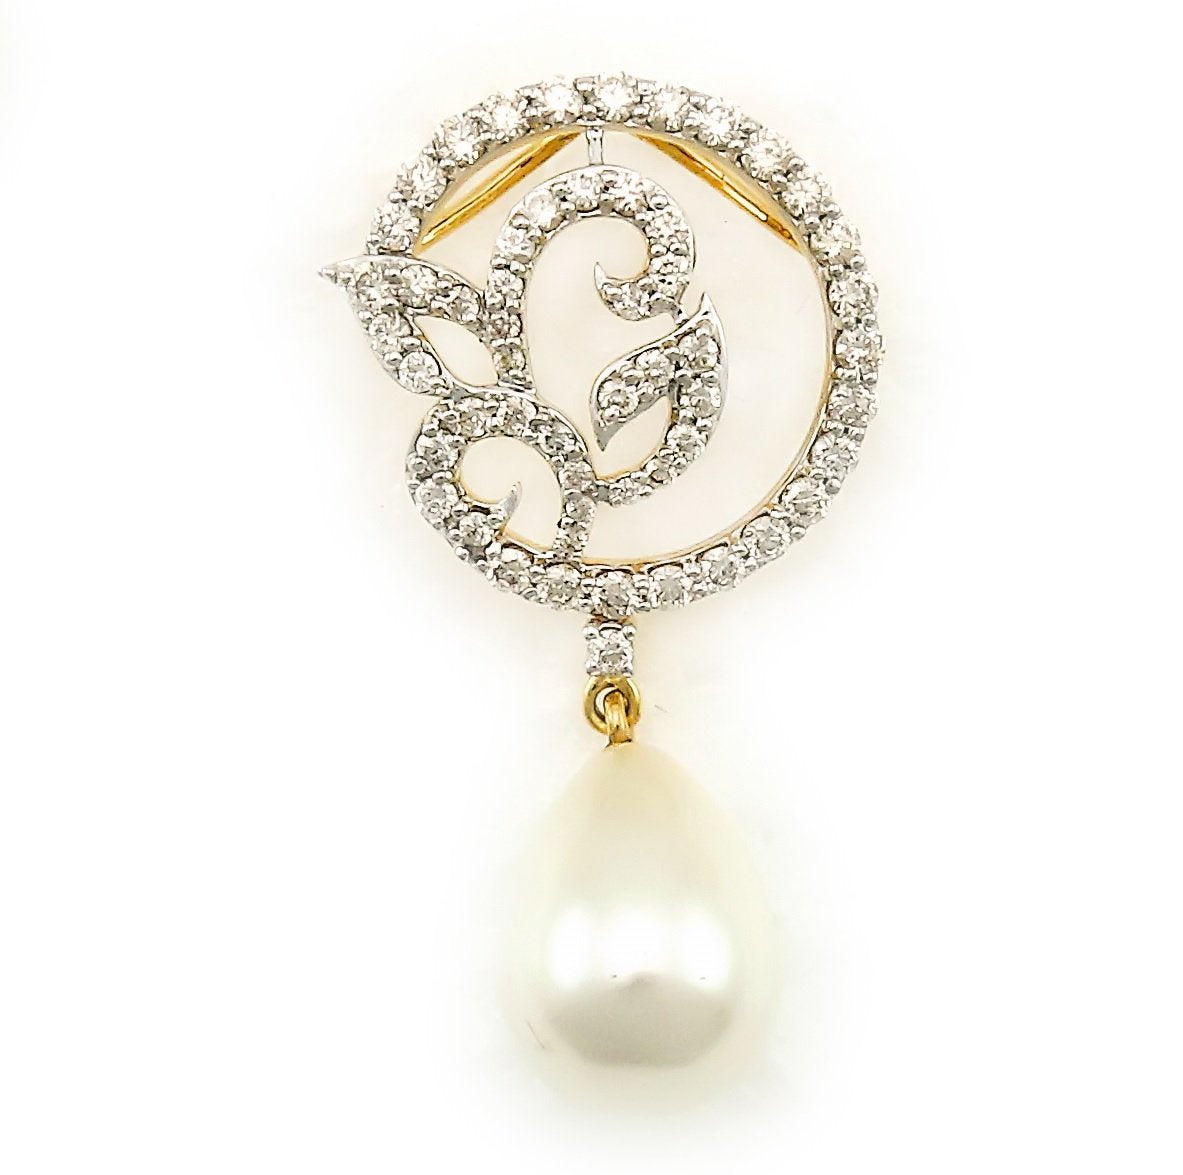 Two Tones  Gold Diamond and Pearl Pendent setting with Natural Round Diamonds TDW: 0.8ct VS GH14k